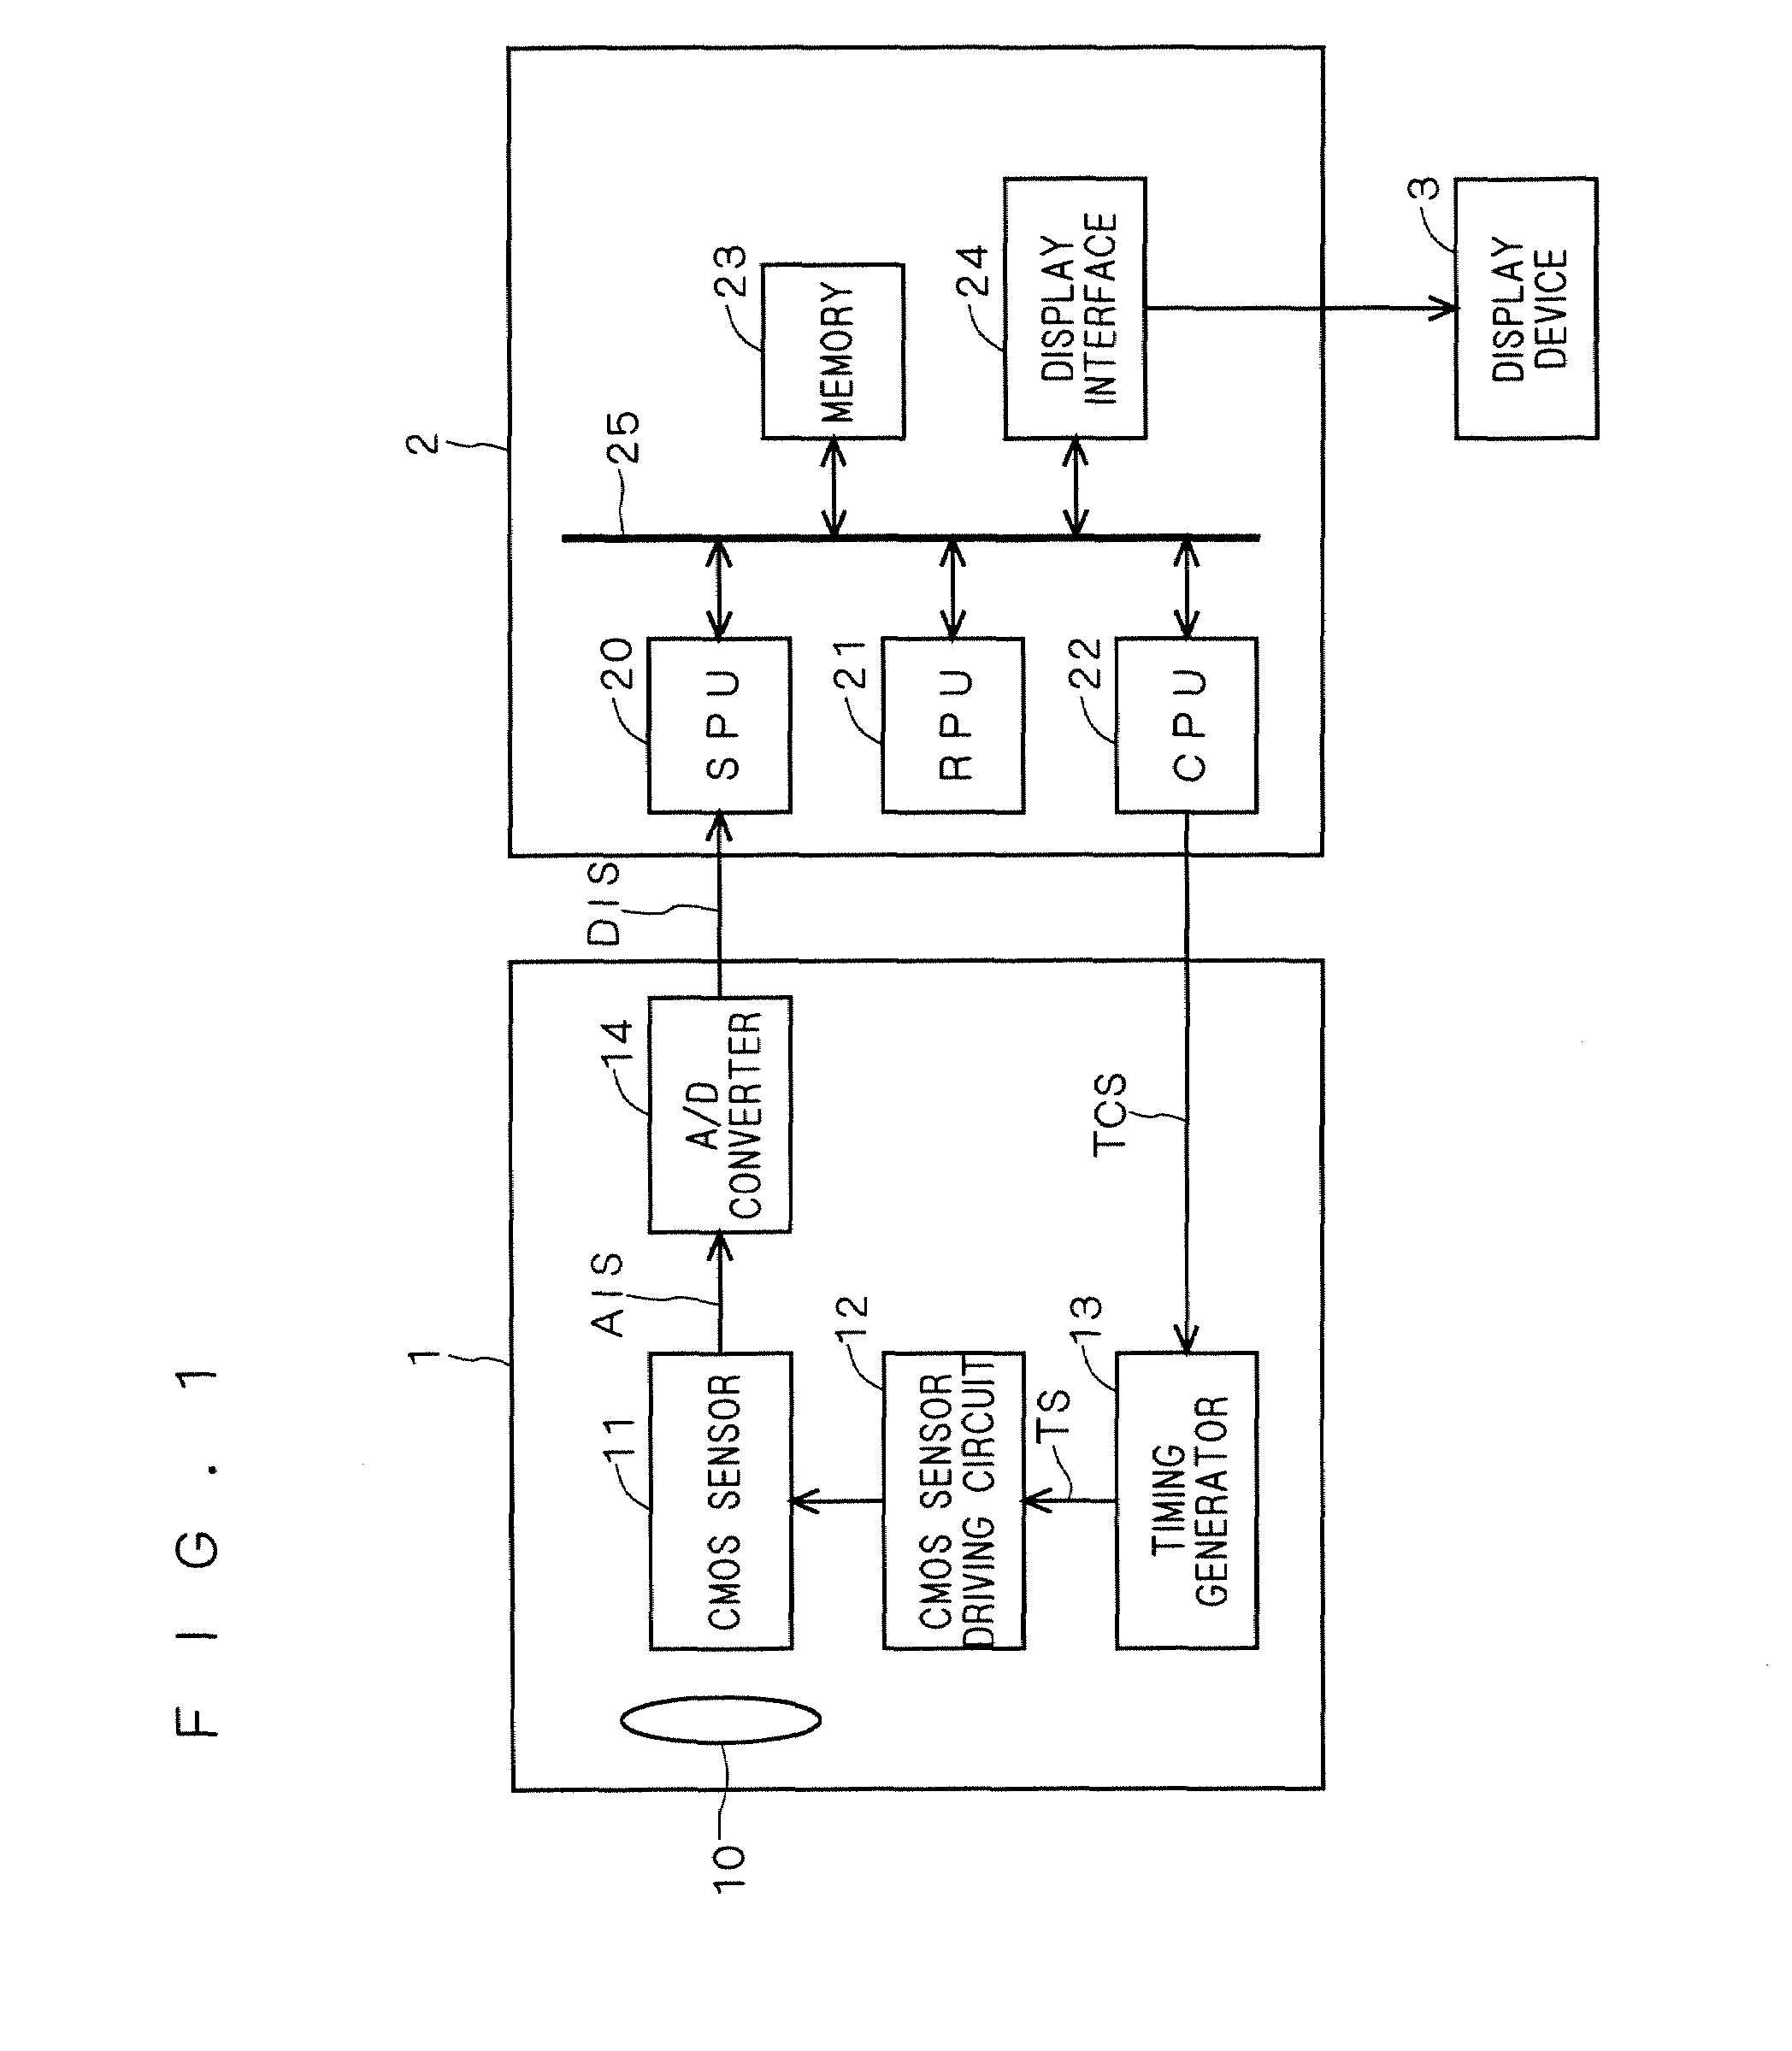 Image processor and camera system, image processing method, and motion picture displaying method